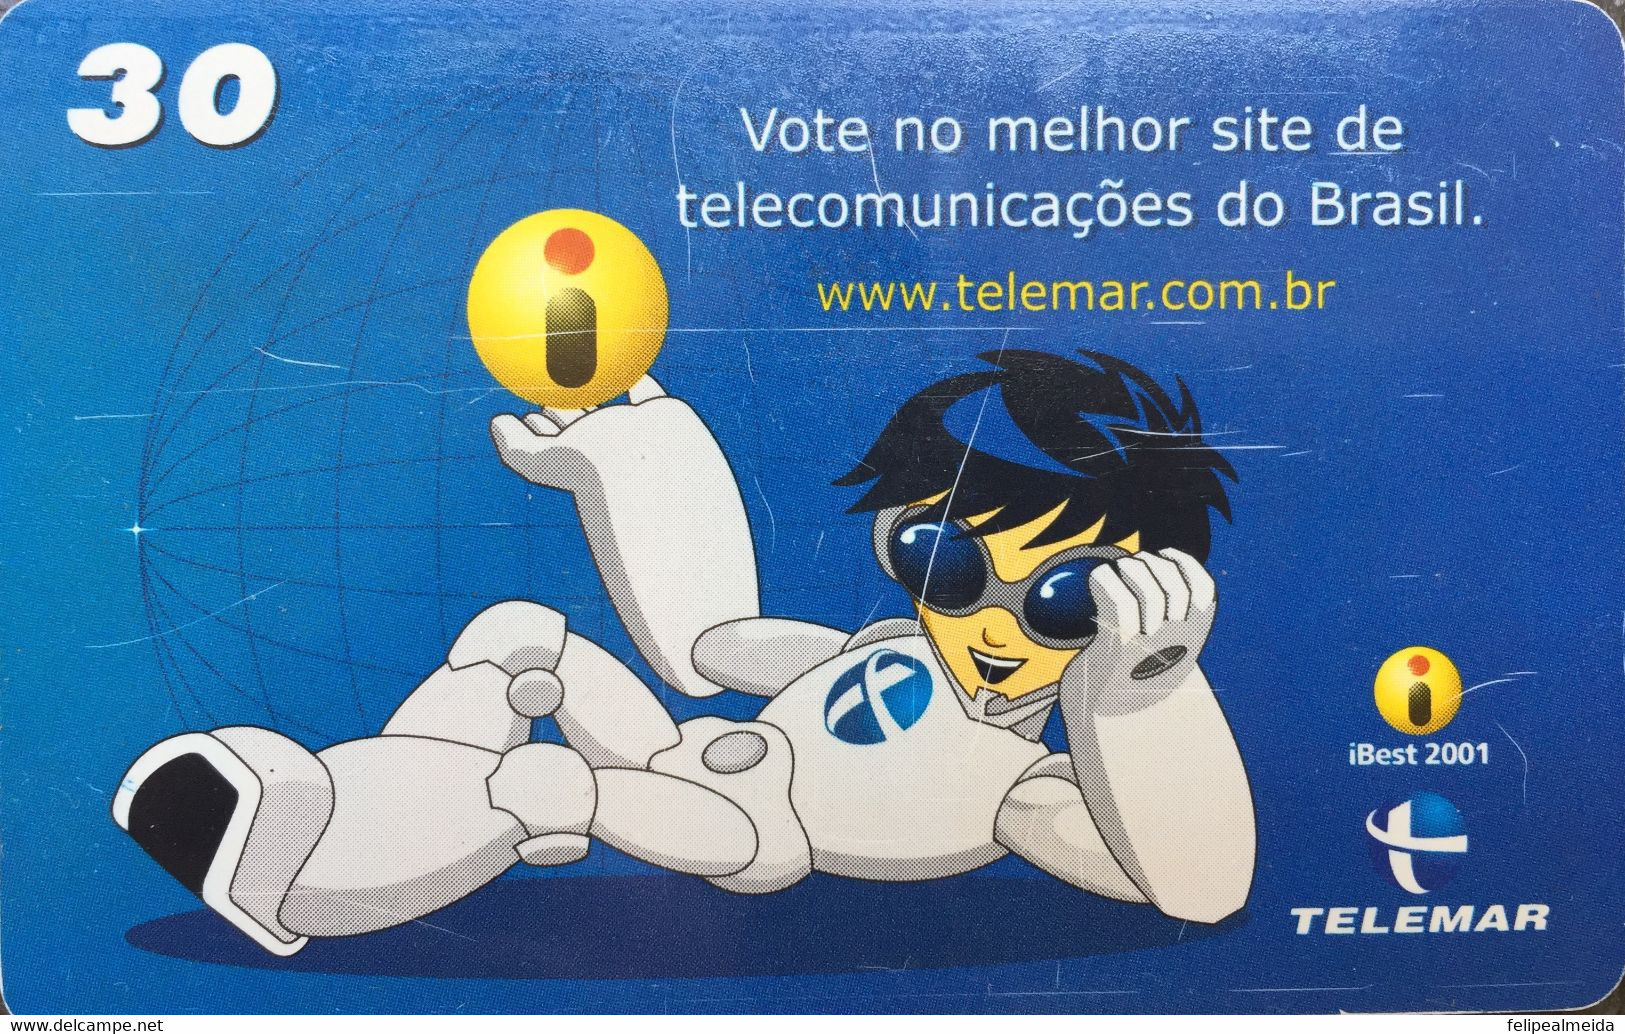 Phone Card Made By Telemar In 2001 - Telemar In The Ibest 2001 Award - The Biggest Award In The Brazilian Internet - Telecom